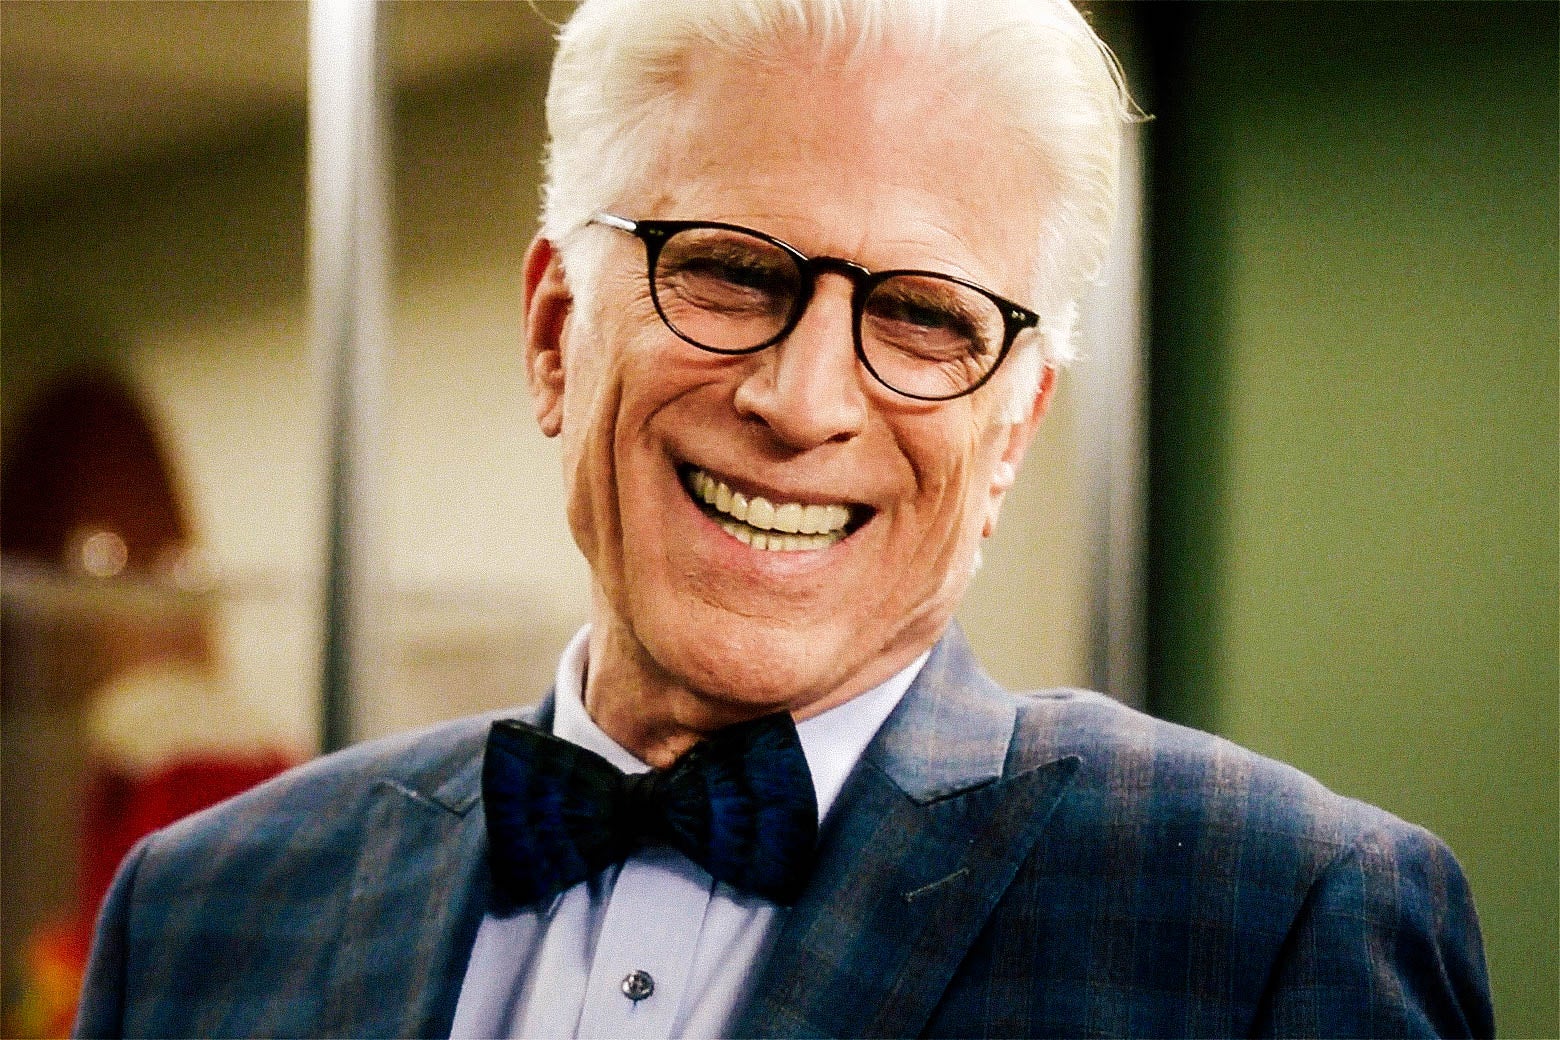 Ted Danson smiles in The Good Place.